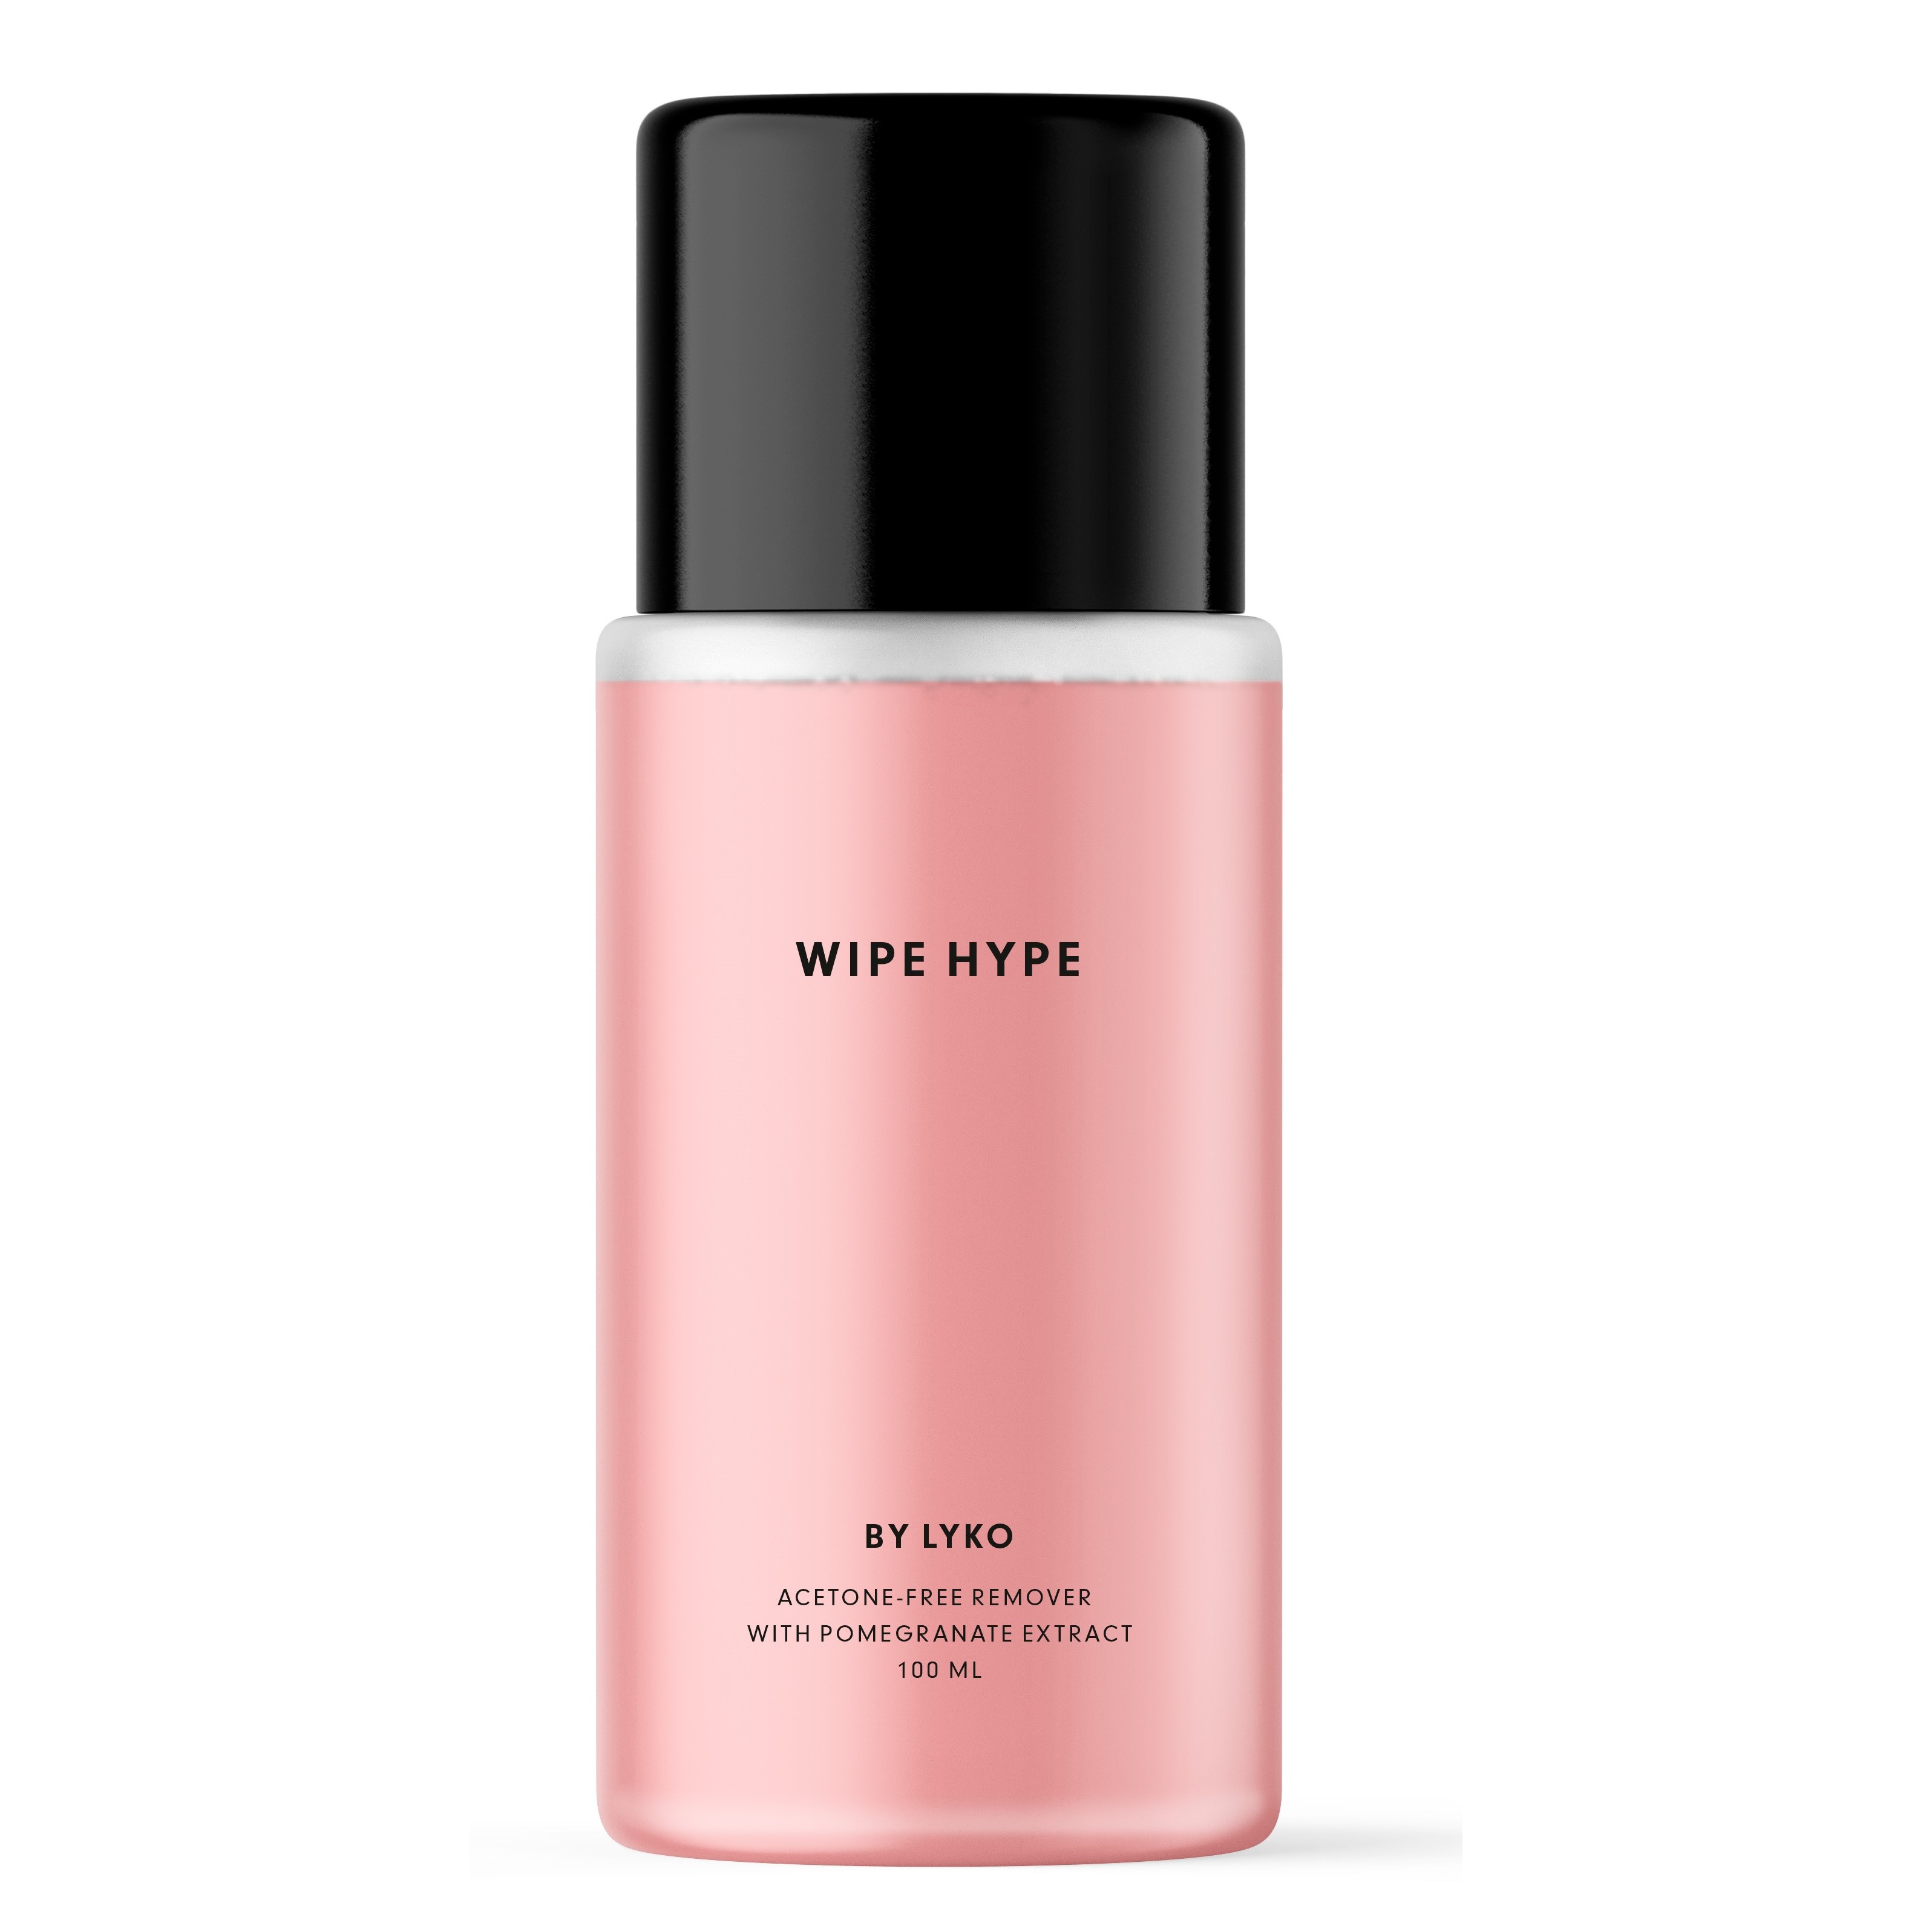 Läs mer om By Lyko Wipe hype Aceton Free Polish remover